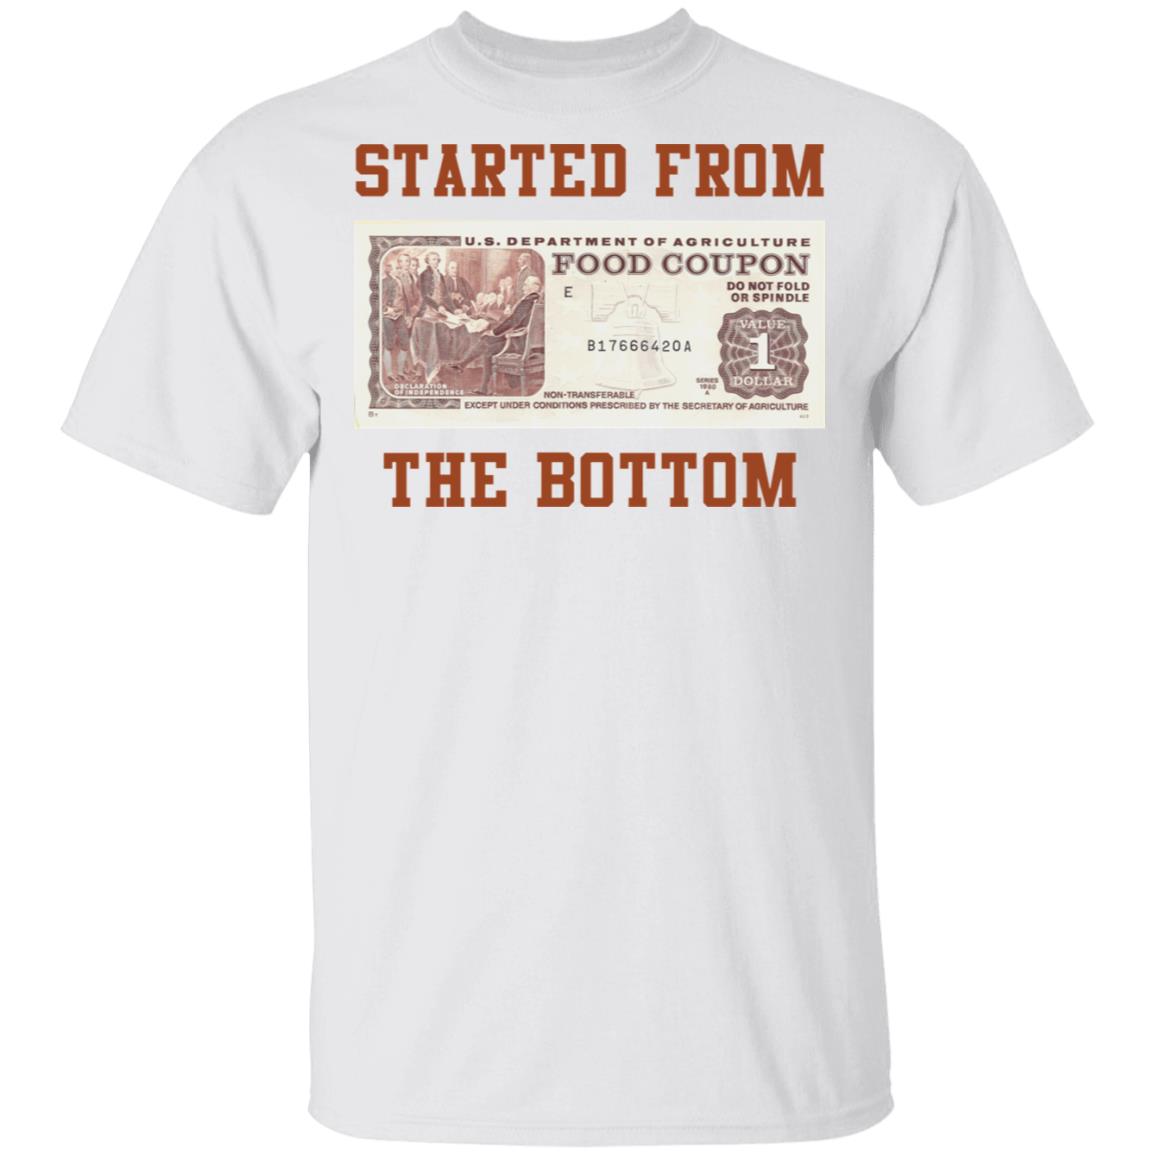 Food Stamp Started From The Bottom shirt